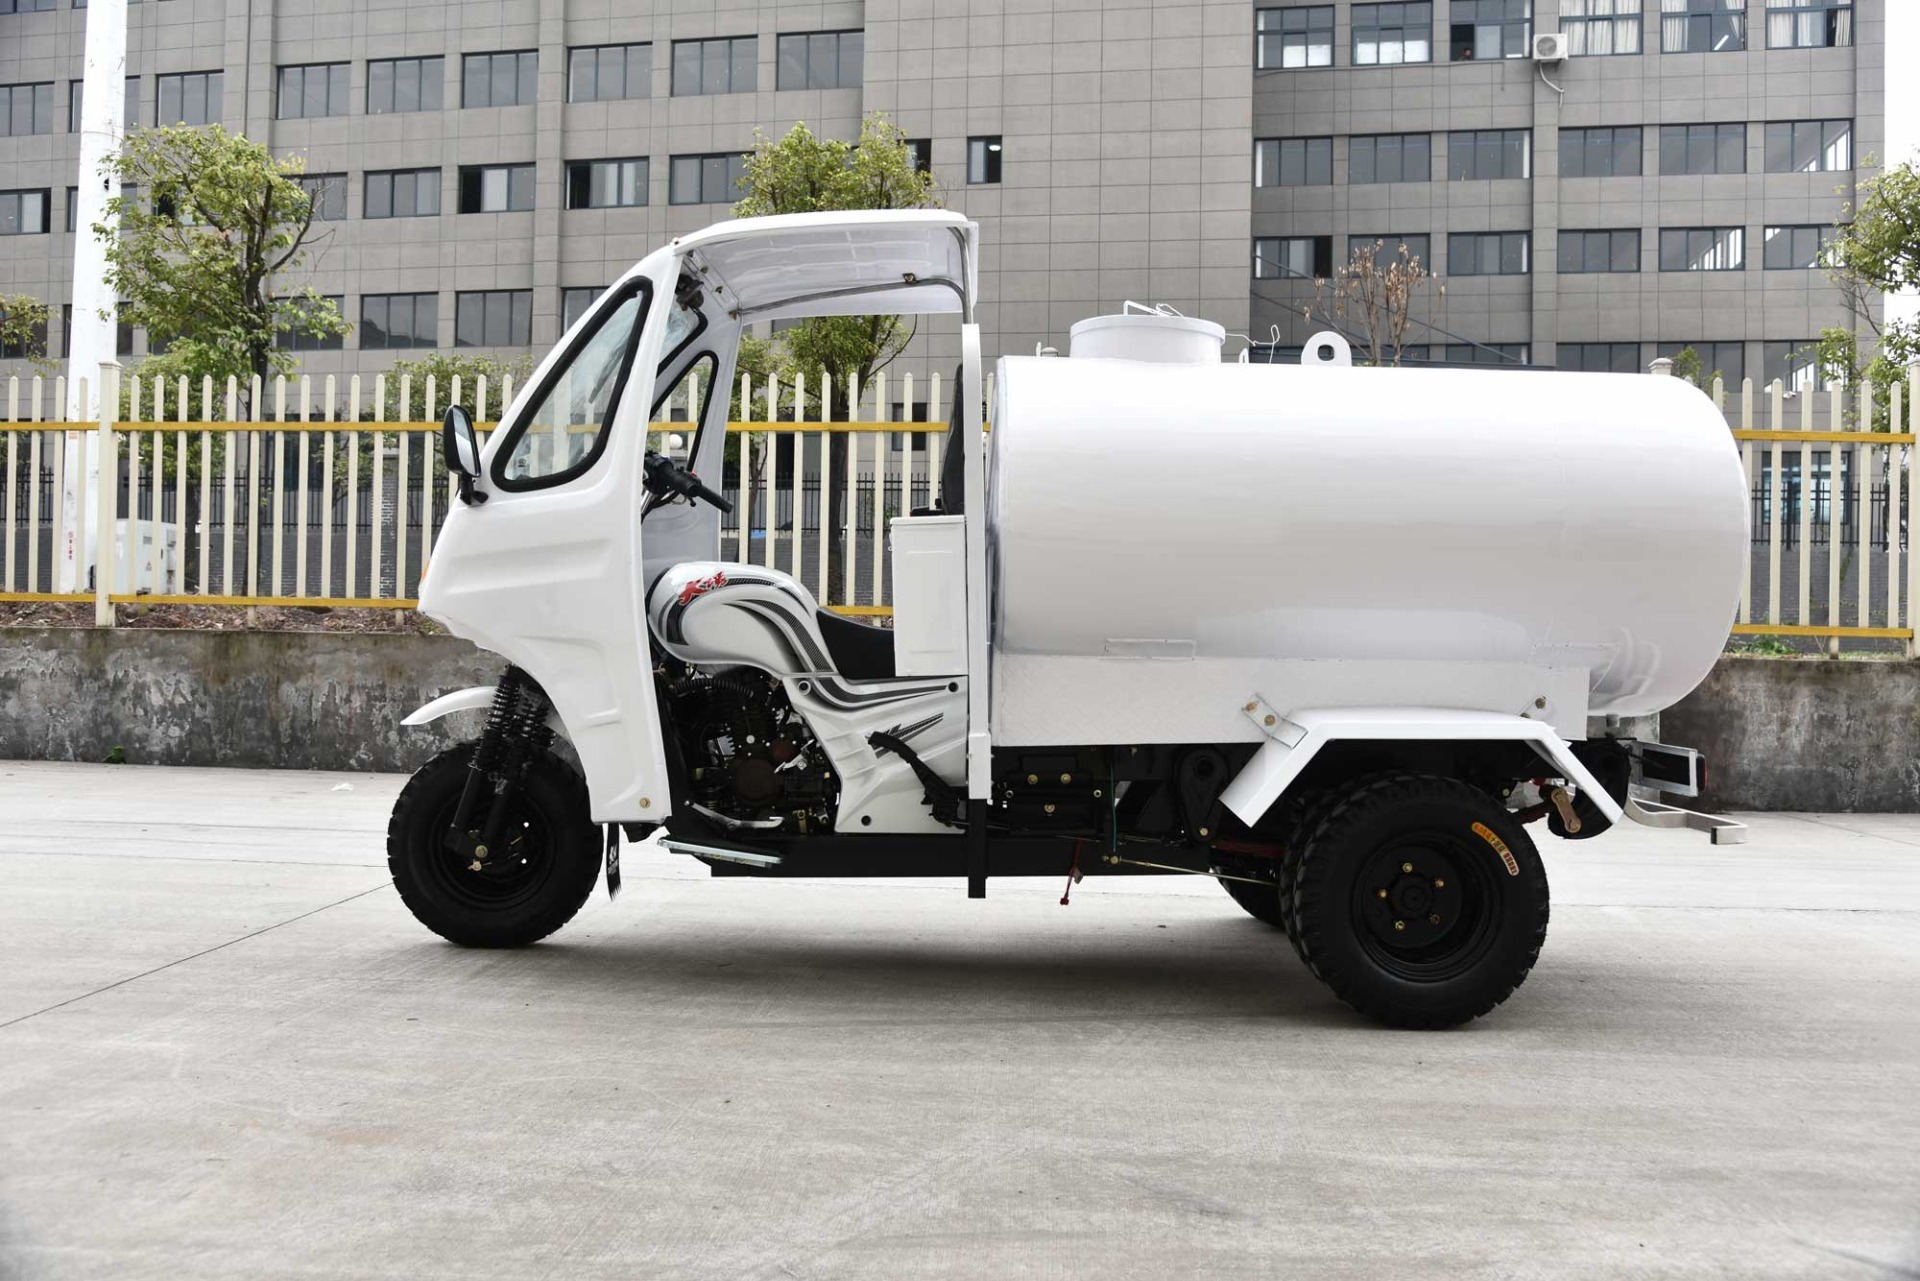 DY-TW1 DAYANG brand hot selling models of water tank tricycle with 250cc powerful engine